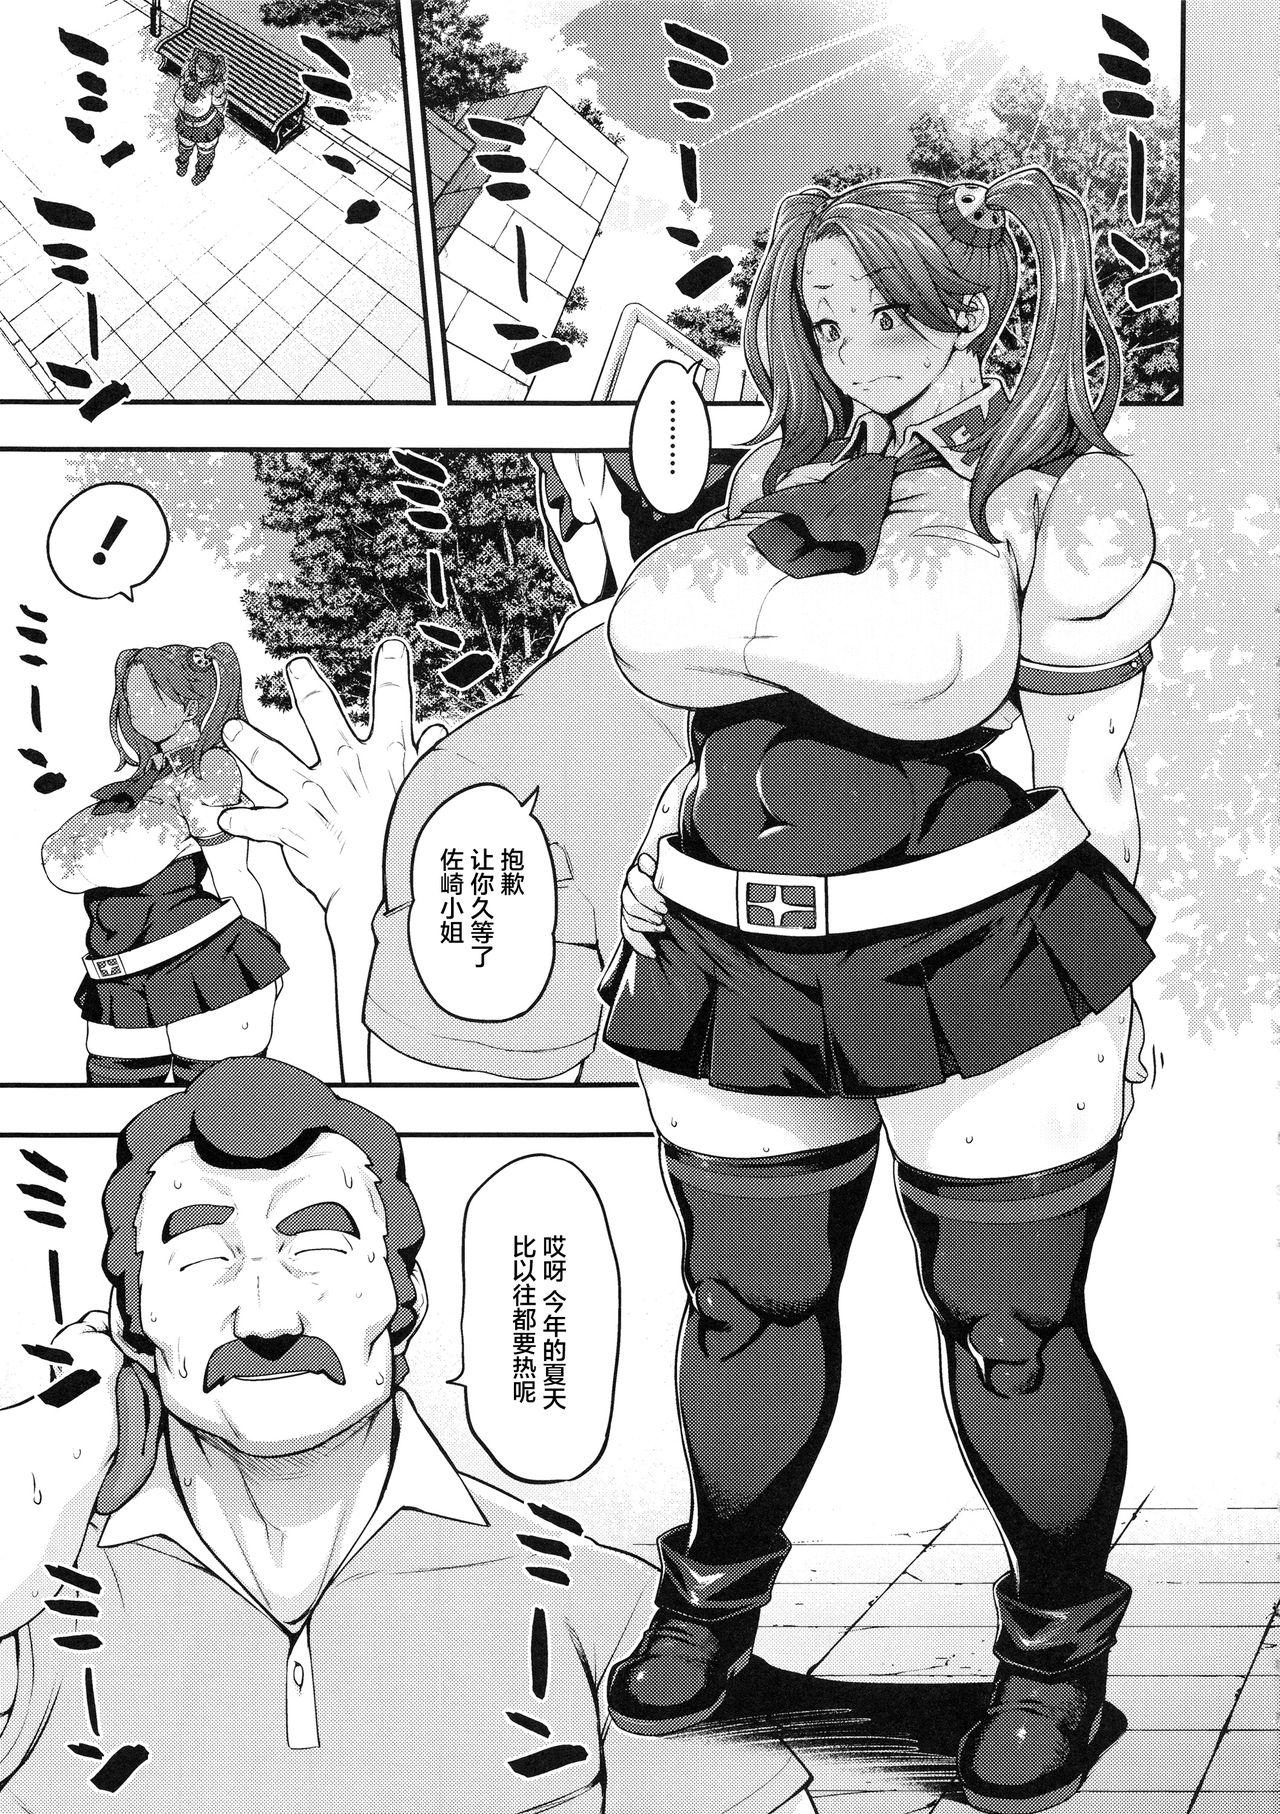 Three Some SHIRITSUBO - Gundam build fighters try Boots - Page 6